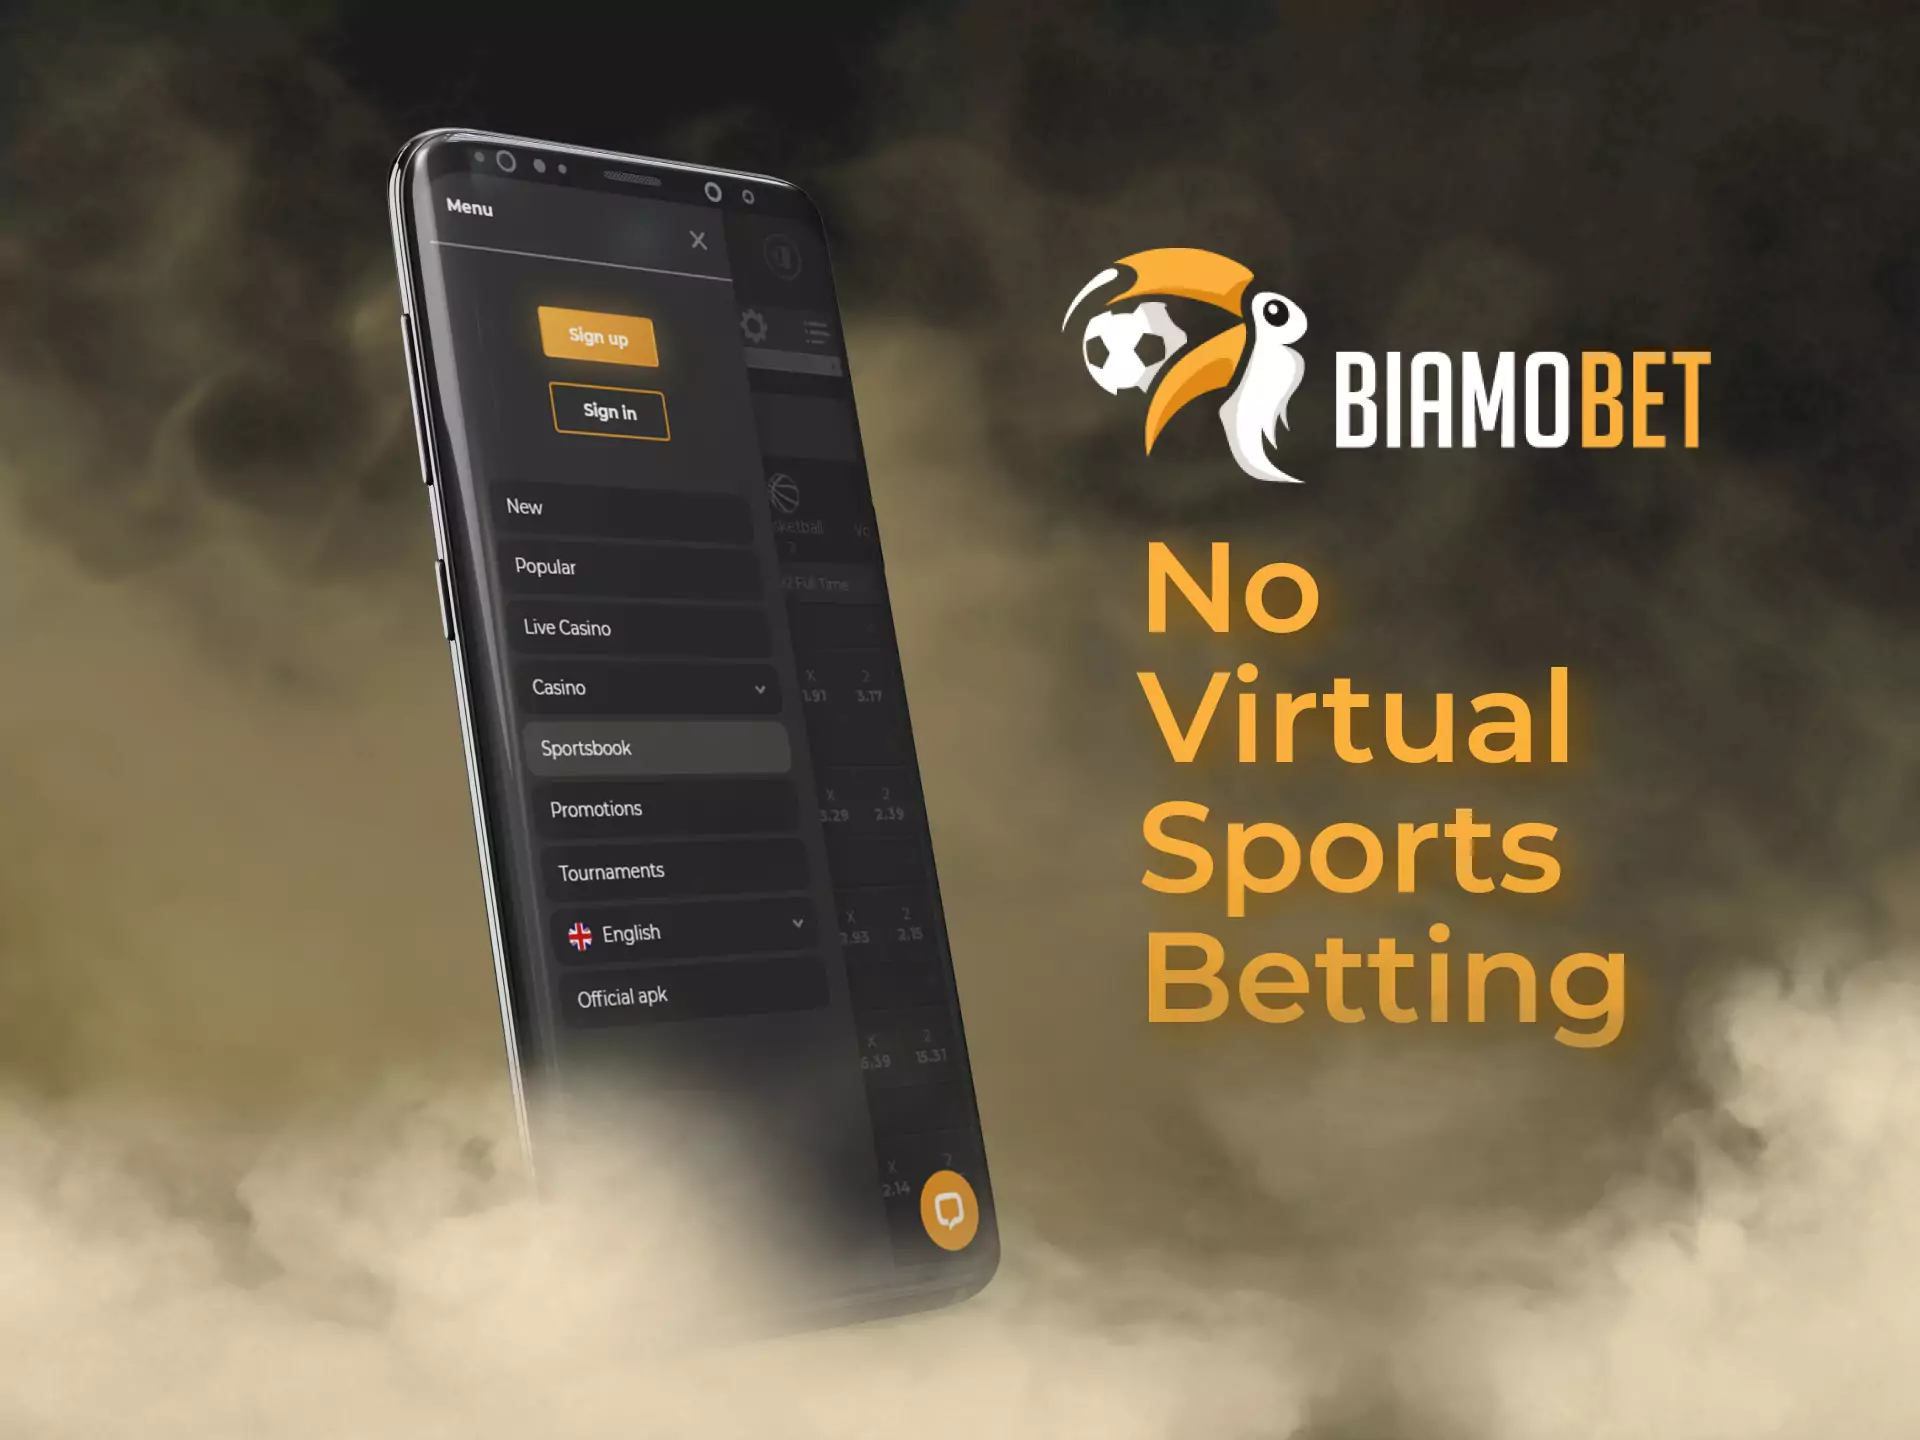 Besides usual sports betting, you can place bets on virtual sports.